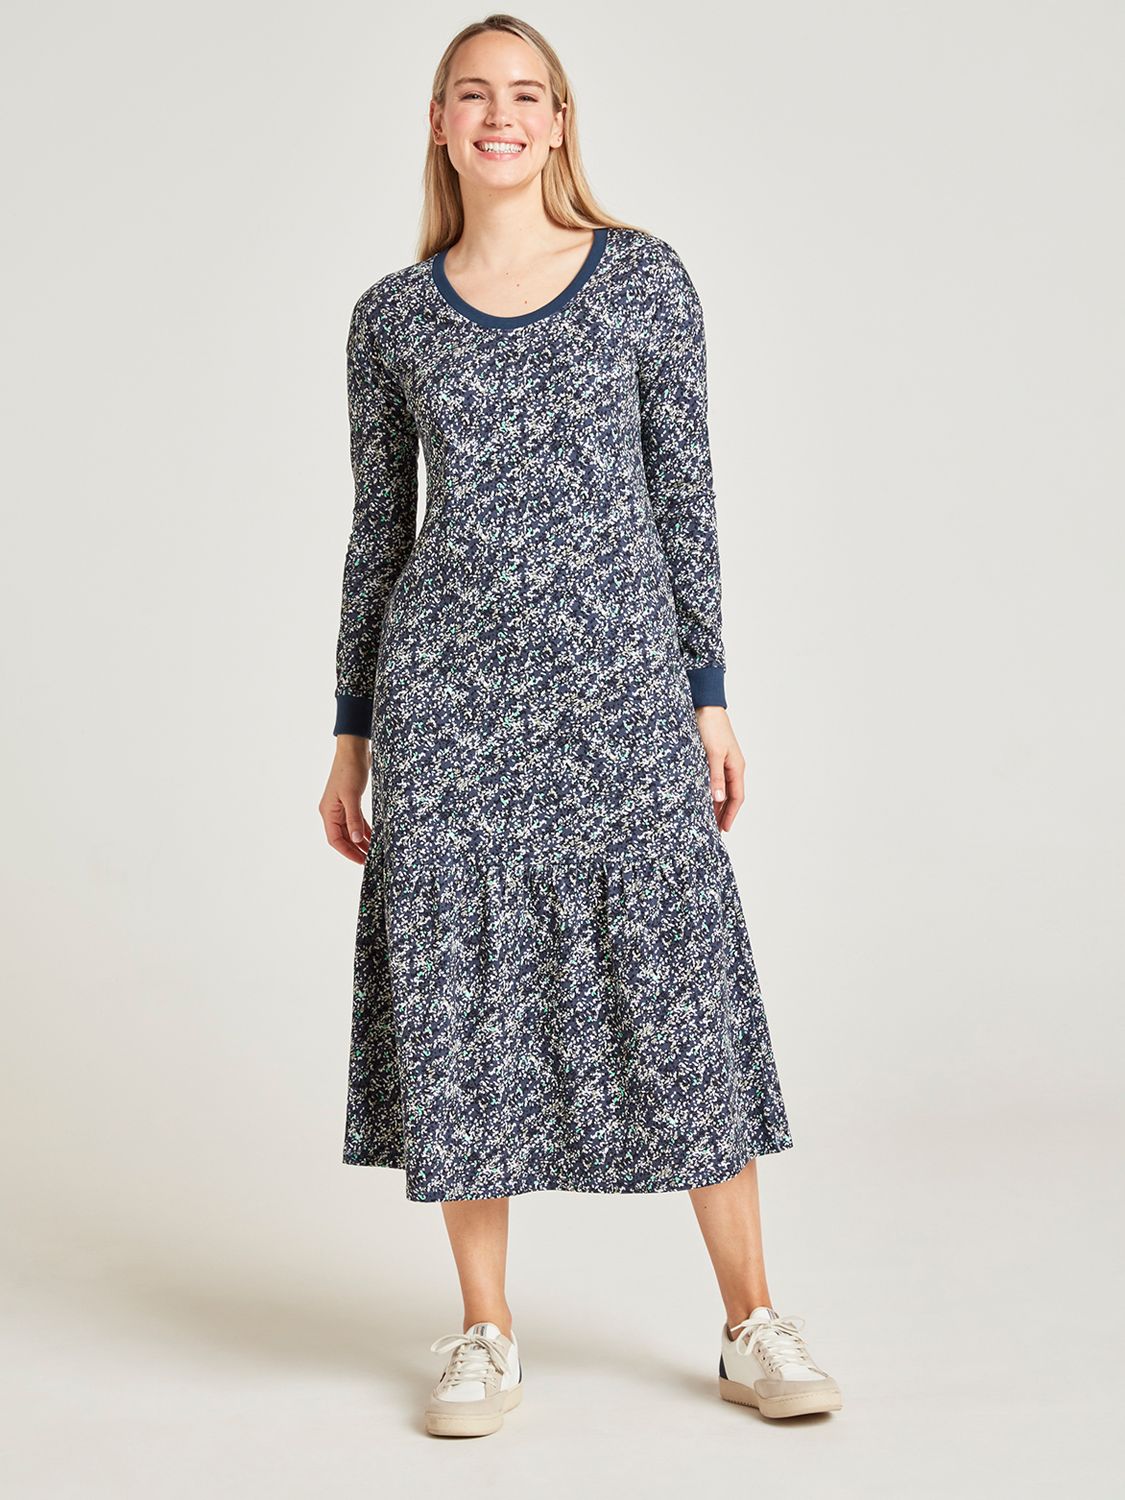 Thought Colette Fairtrade Organic Cotton Dress, Navy